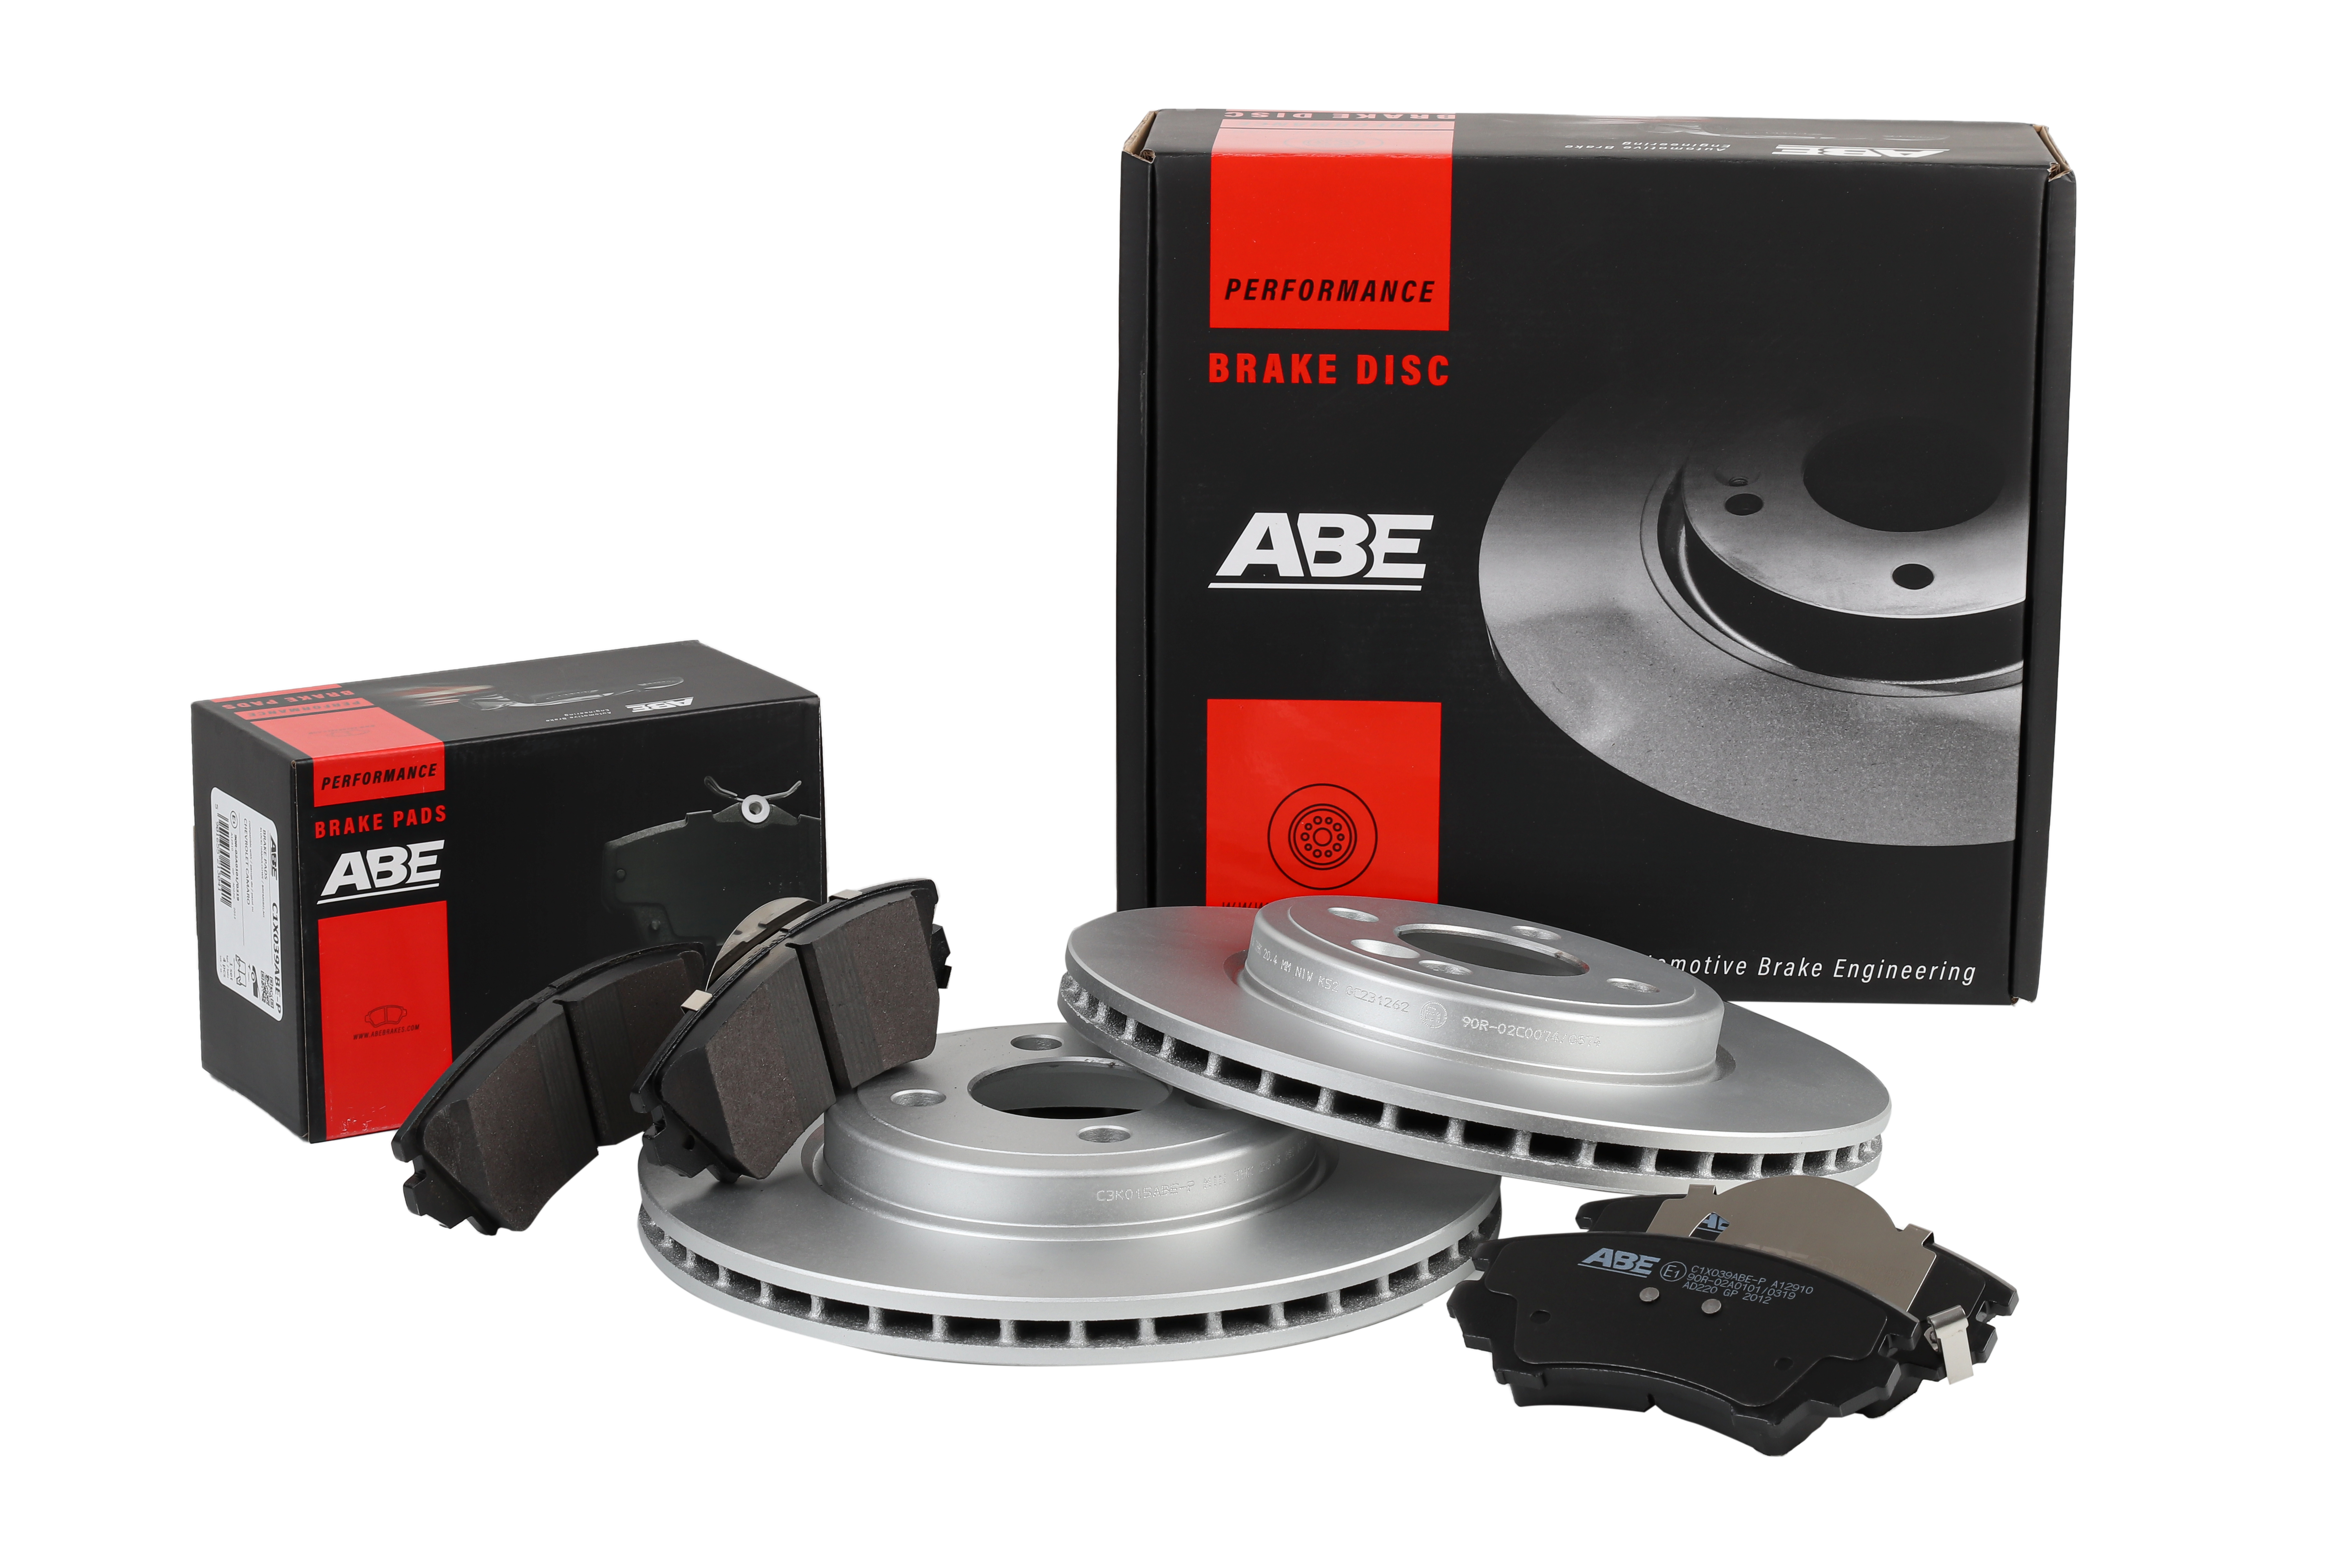 The second part of operational tests of ABE PERFORMANCE brakes